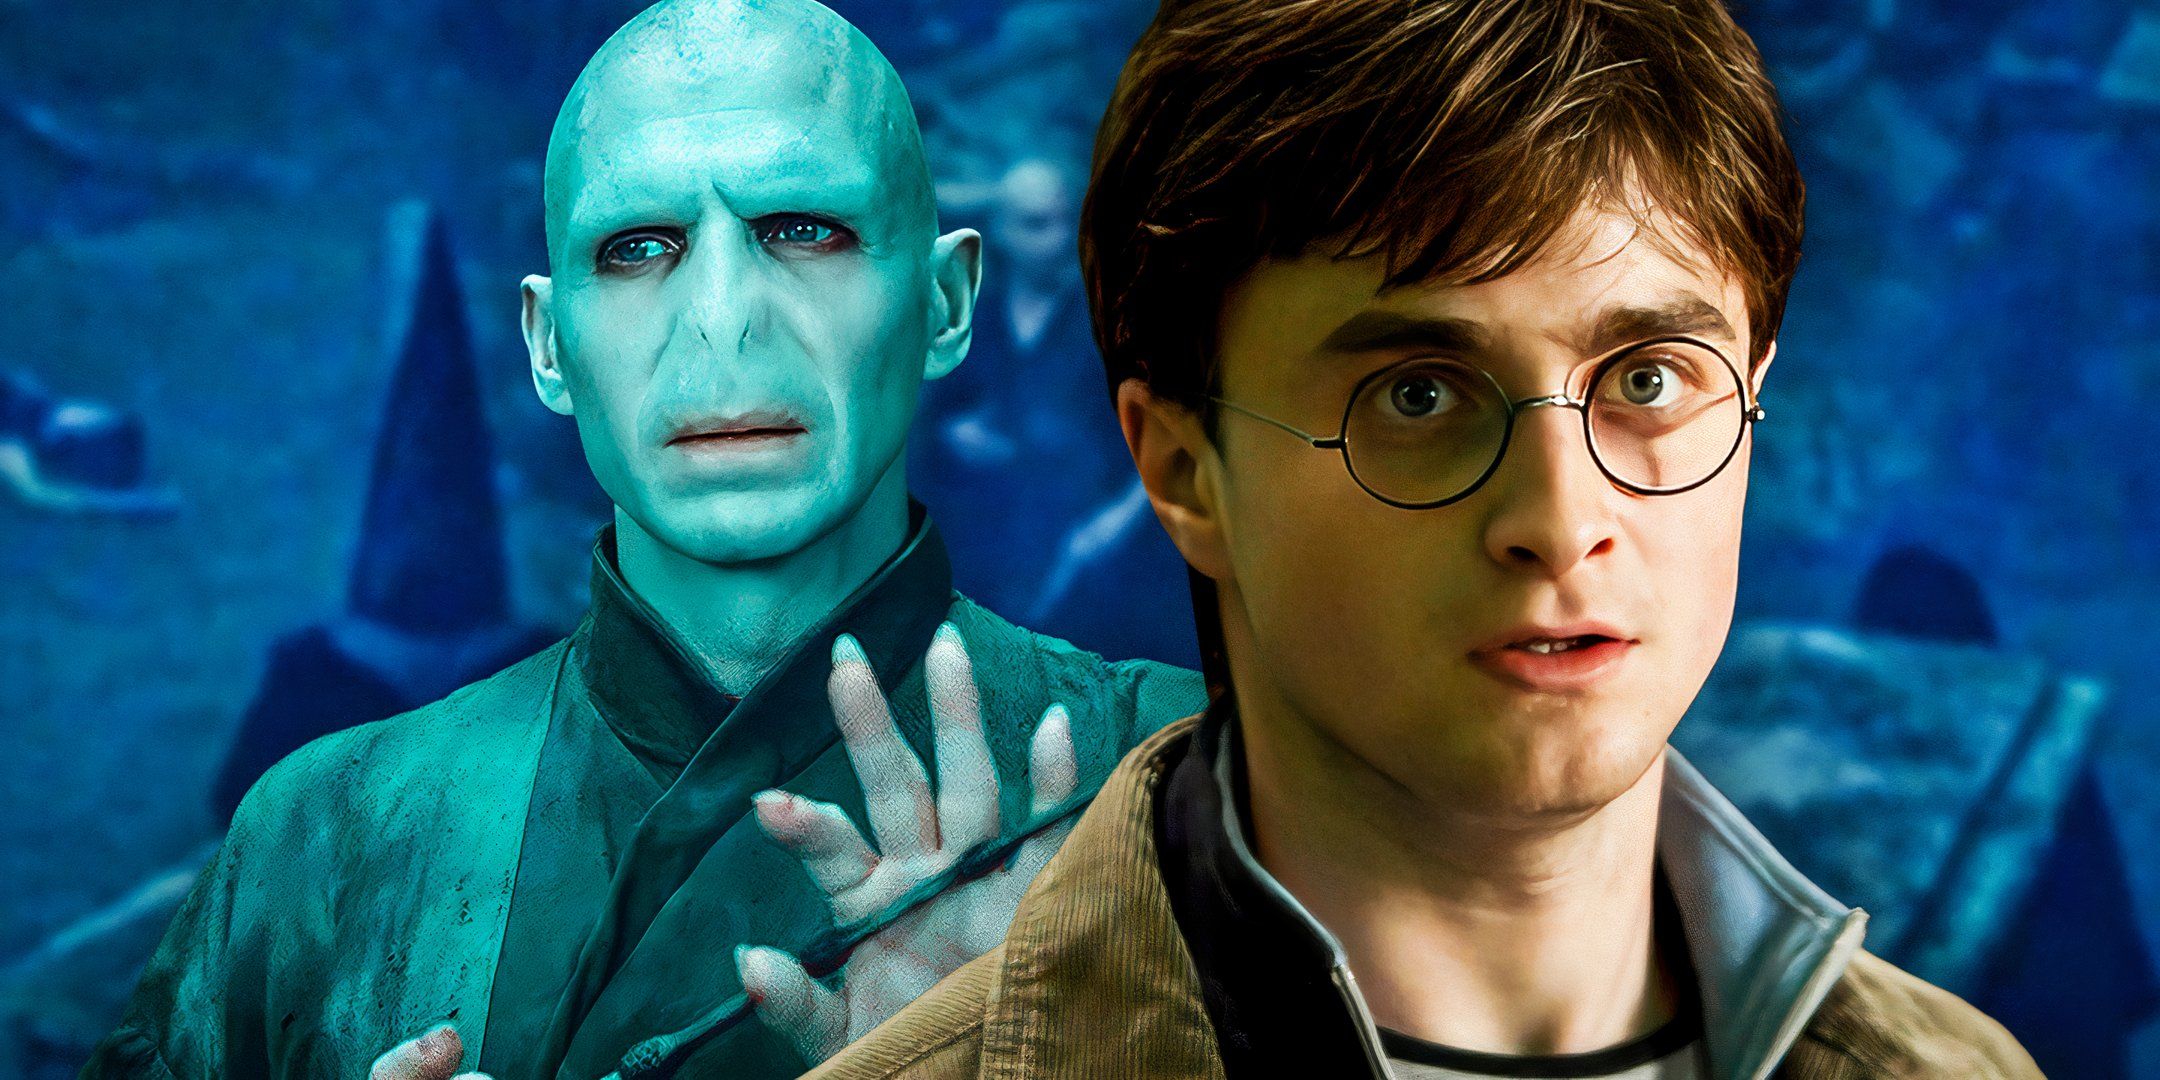 _Daniel-Radcliffe-as-Harry-Potter--and-Voldemort-from-The-Harry-Potter-Movies